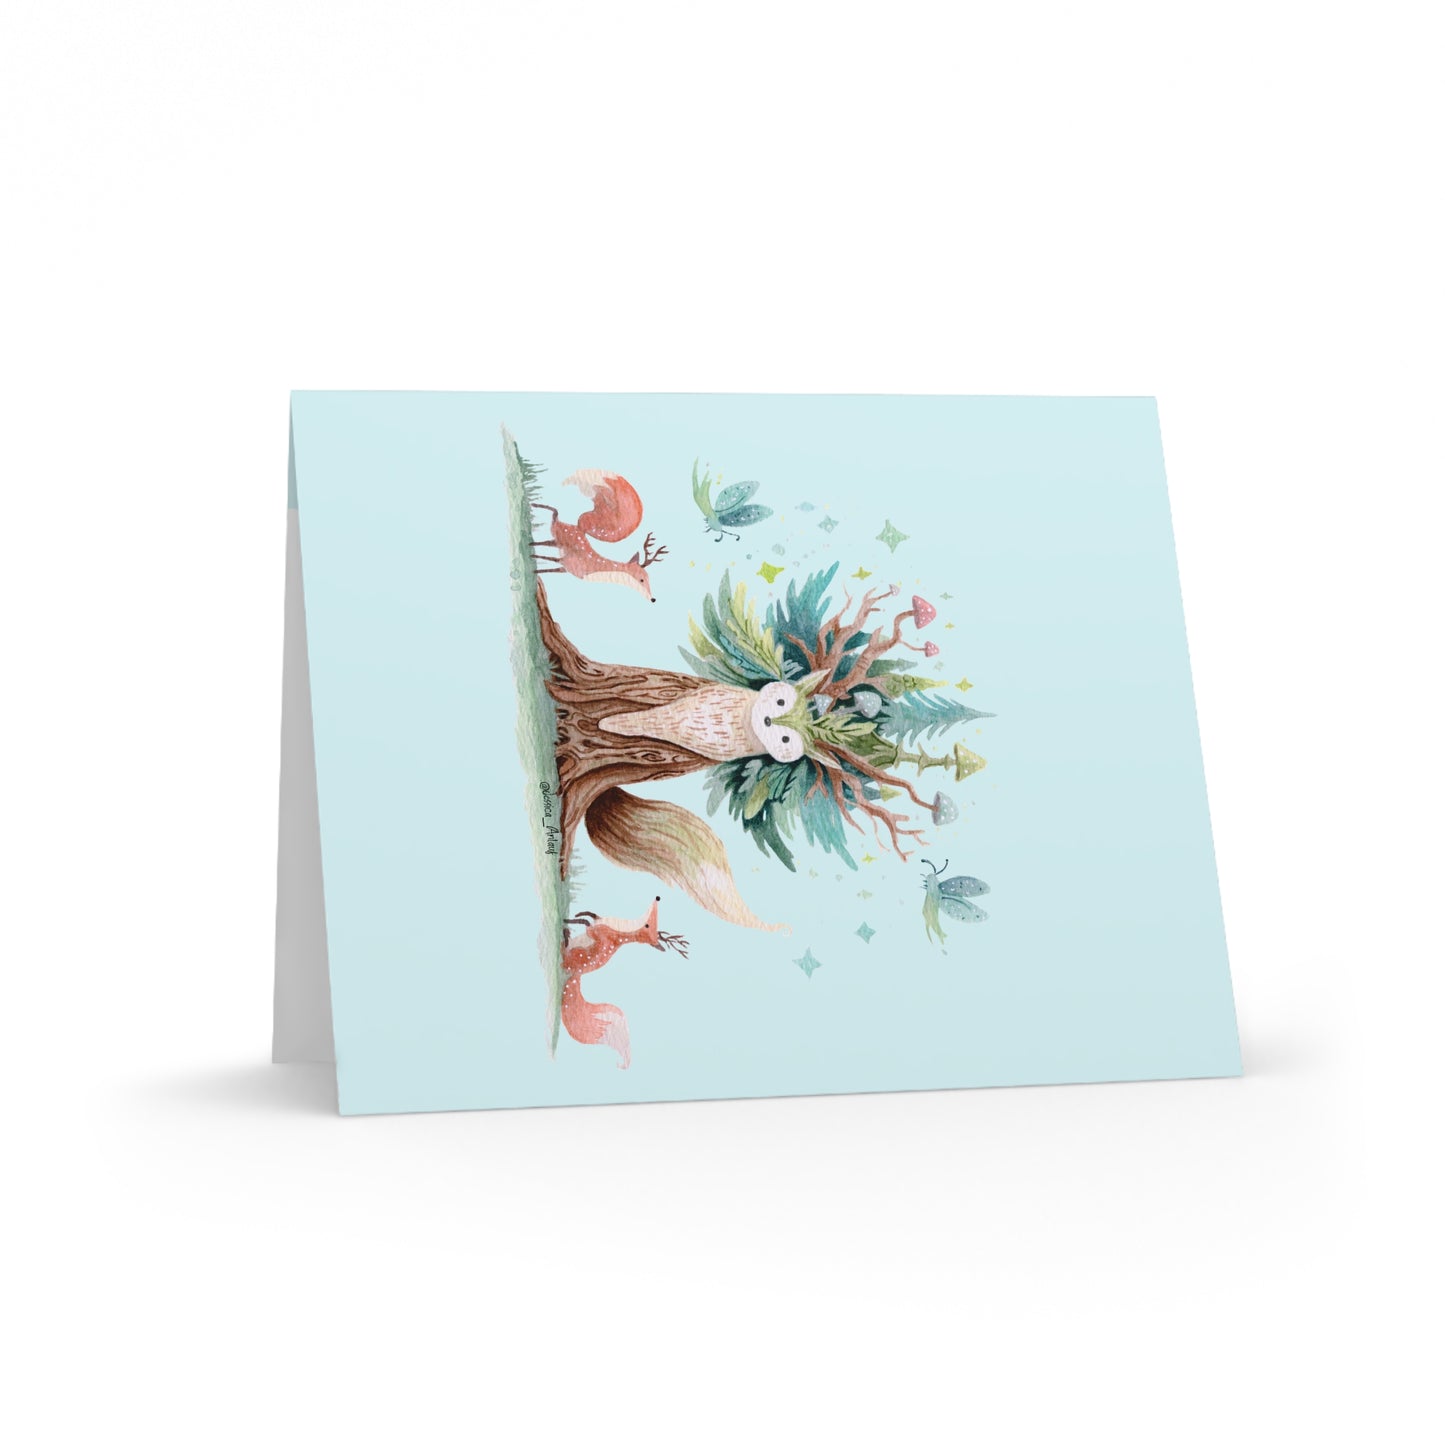 Greeting cards (8, 16, and 24 pcs)